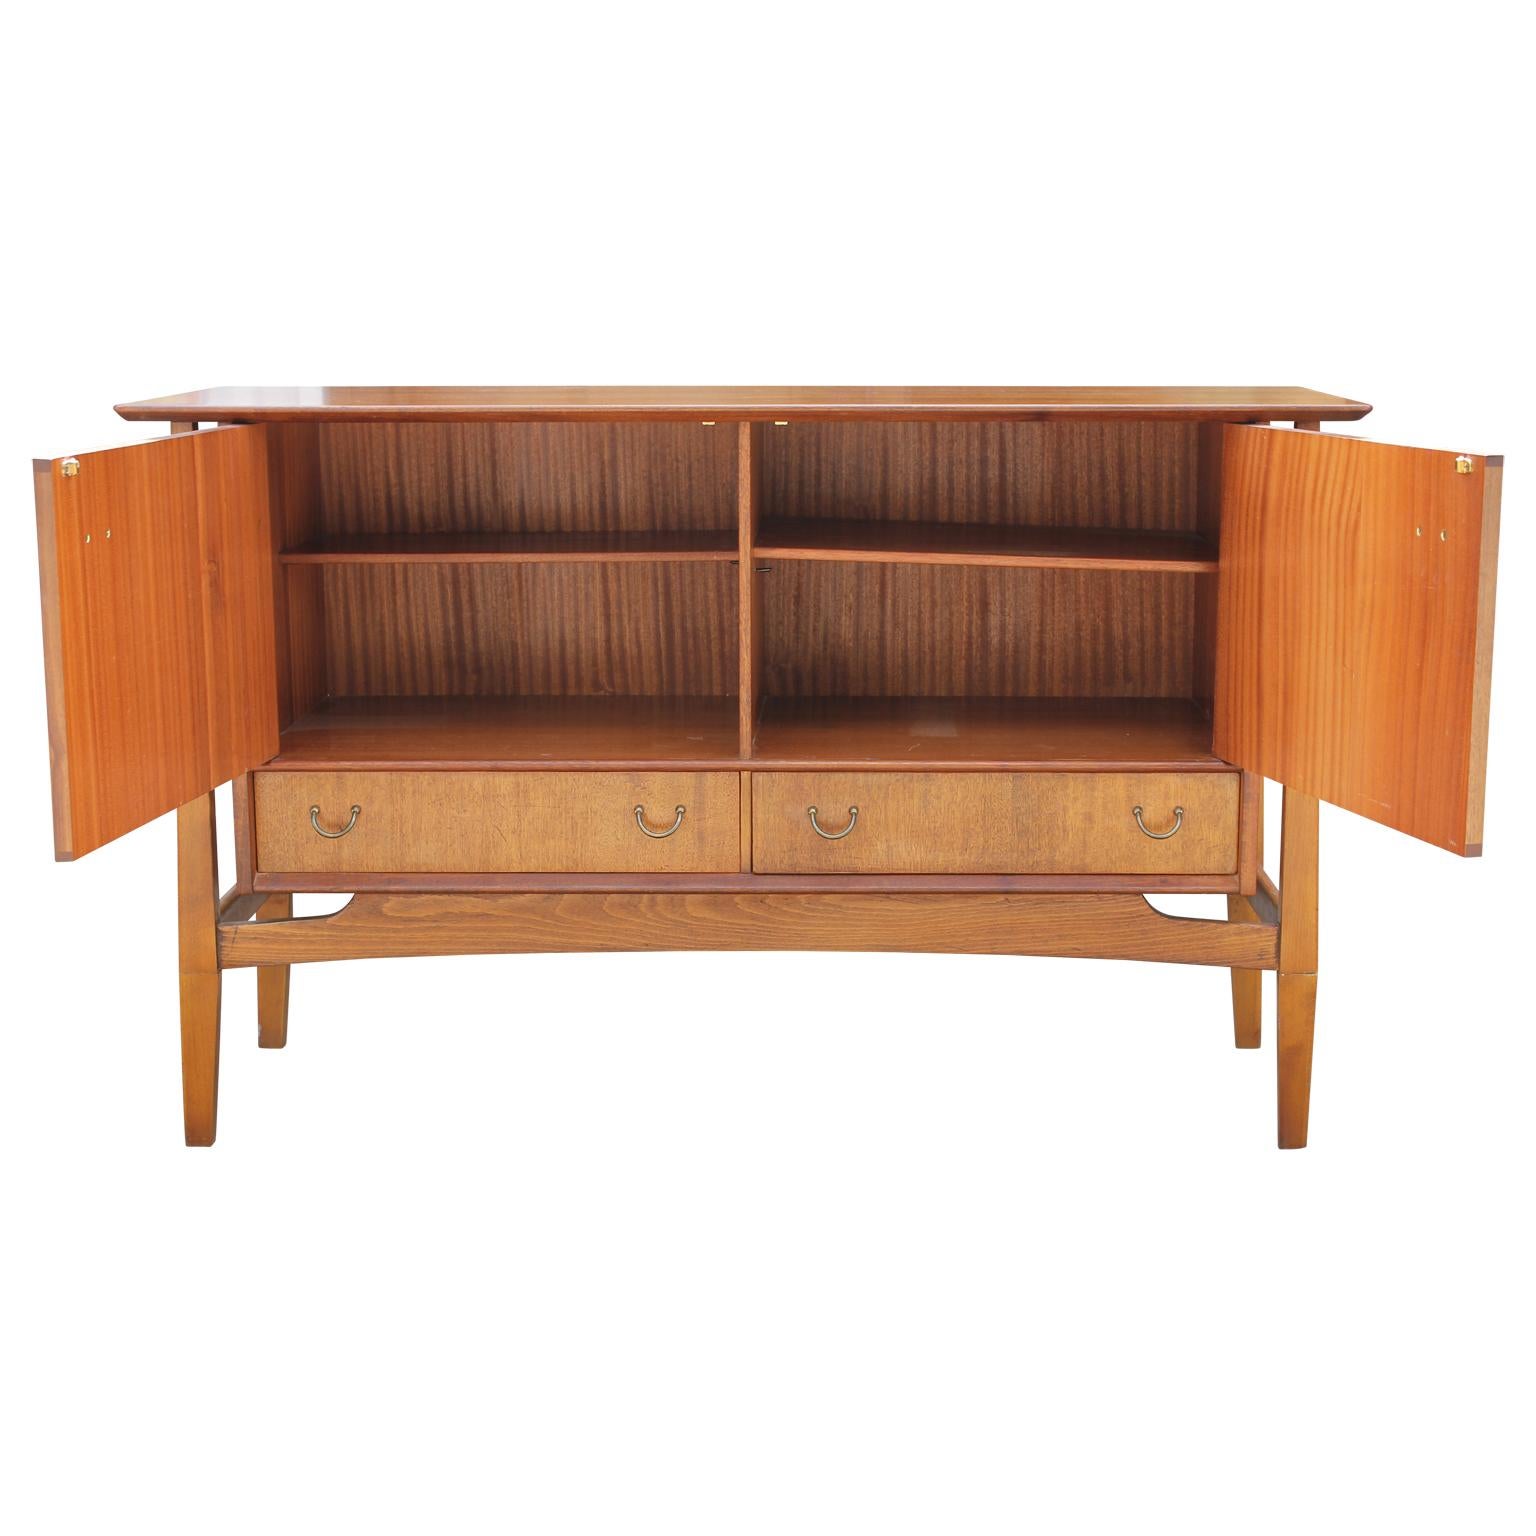 Four shelves teak sideboard or credenza with two pullout / pull-out drawers. The maker's mark is stamped inside the drawer. The floating top is a nice structural accent making this credenza look clean and unique.